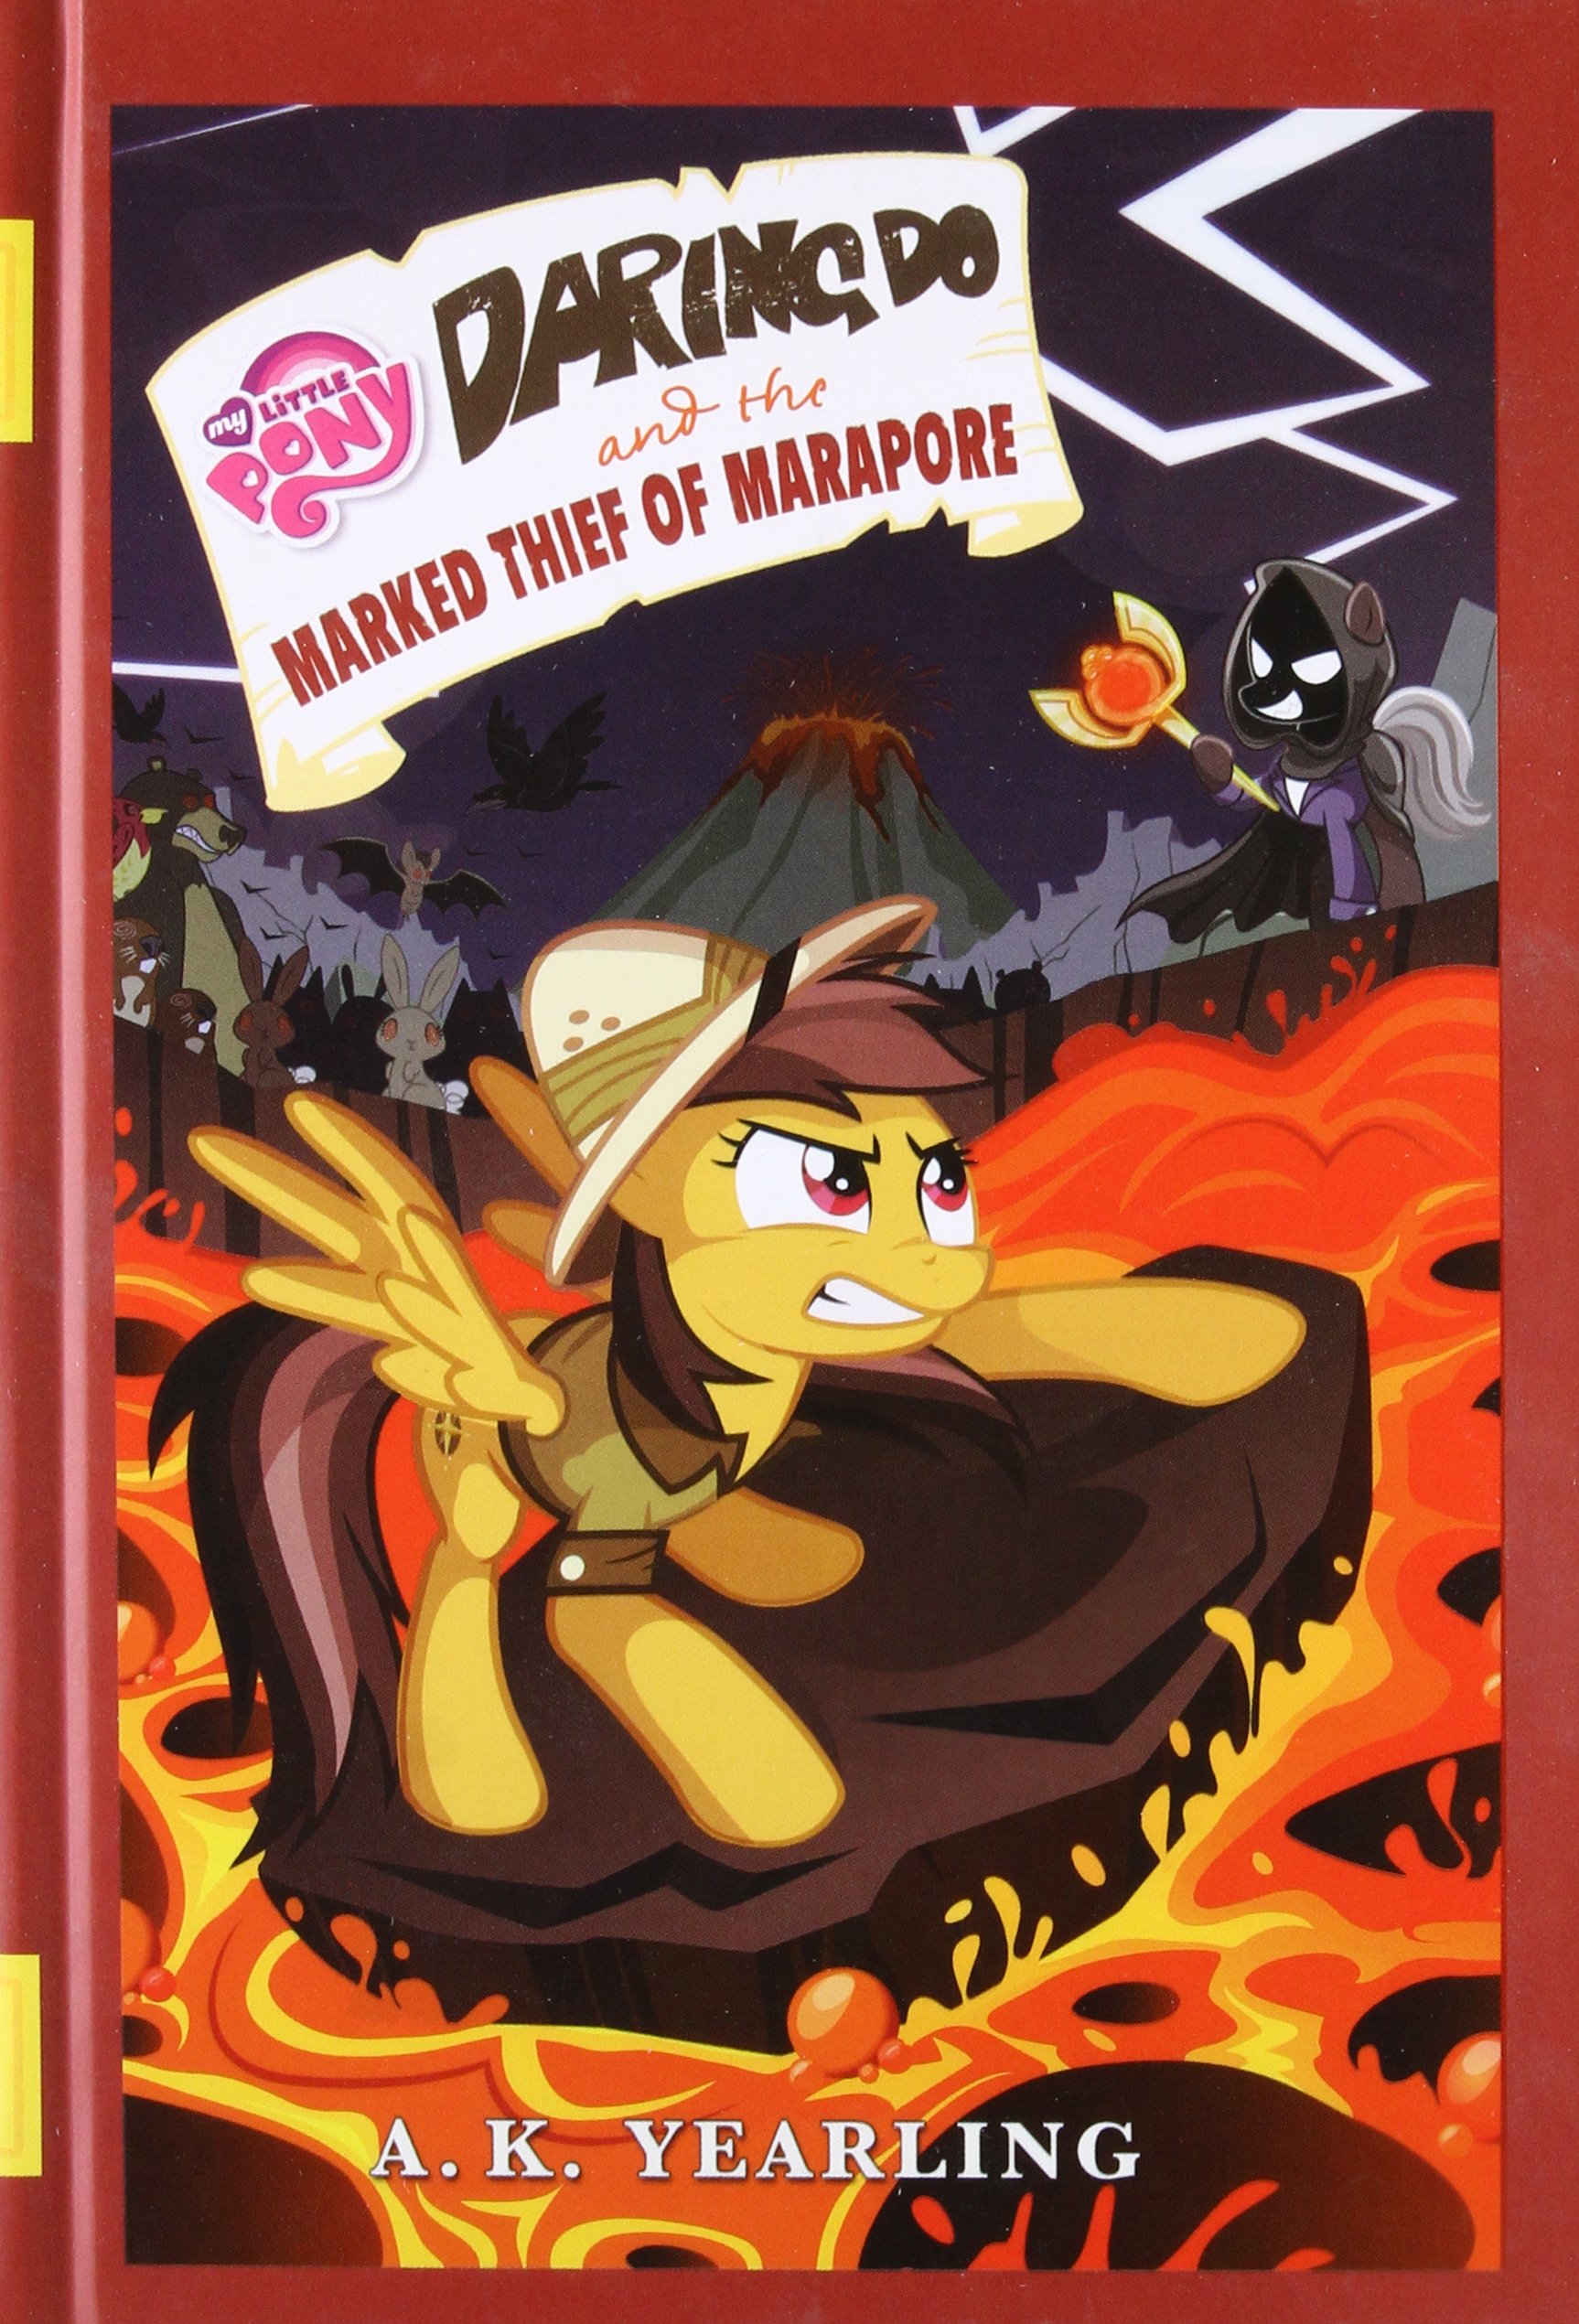 MLP Daring Do and the Marked Thief of Marapore Book 1